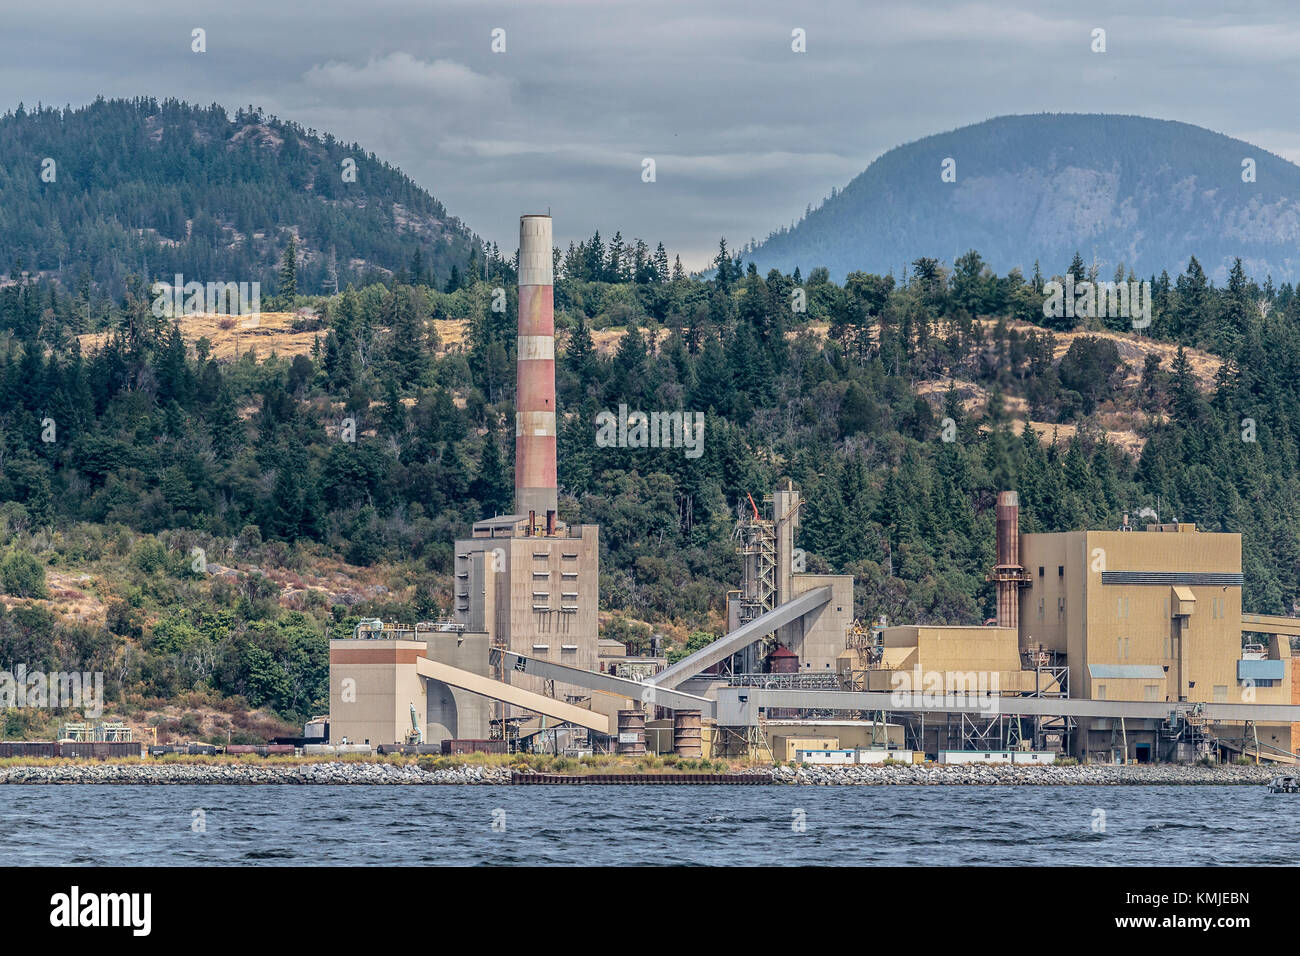 The smokestack at Catalyst Paper's Powell River (tiskwat) Mill is a visible and historic landmark on BC's Sunshine Coast. The mill shut down in 2021. Stock Photo